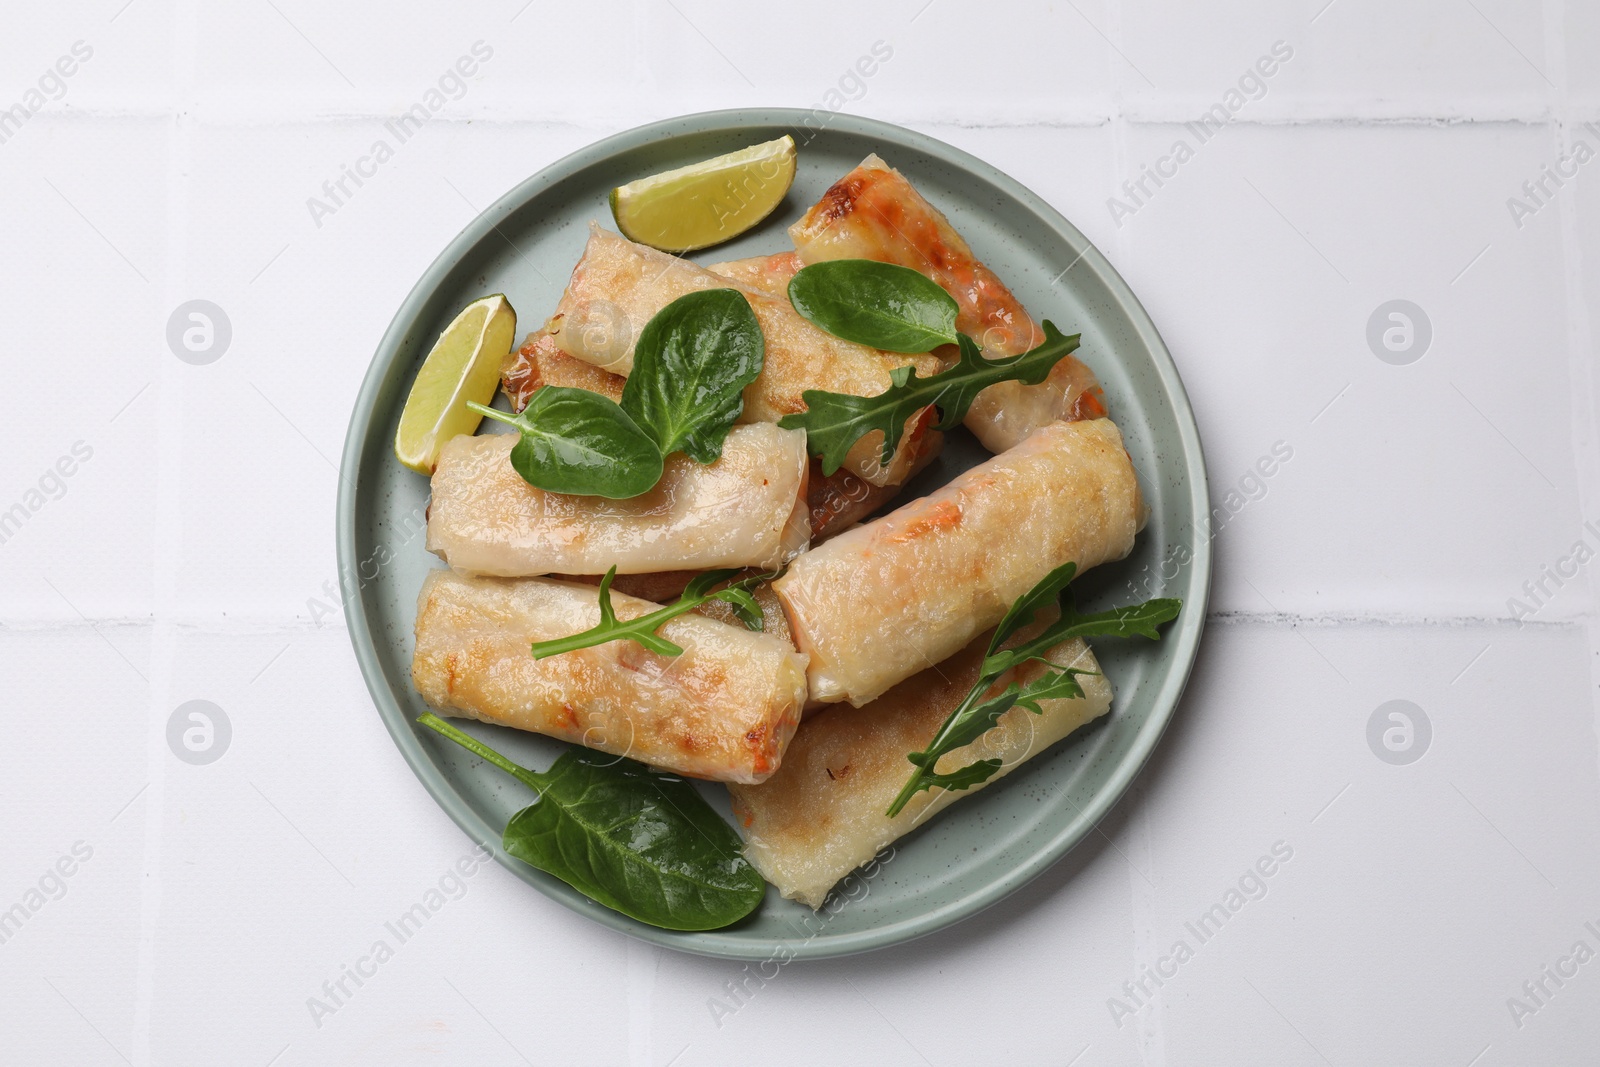 Photo of Plate with tasty fried spring rolls, spinach, arugula and lime on white tiled table, top view